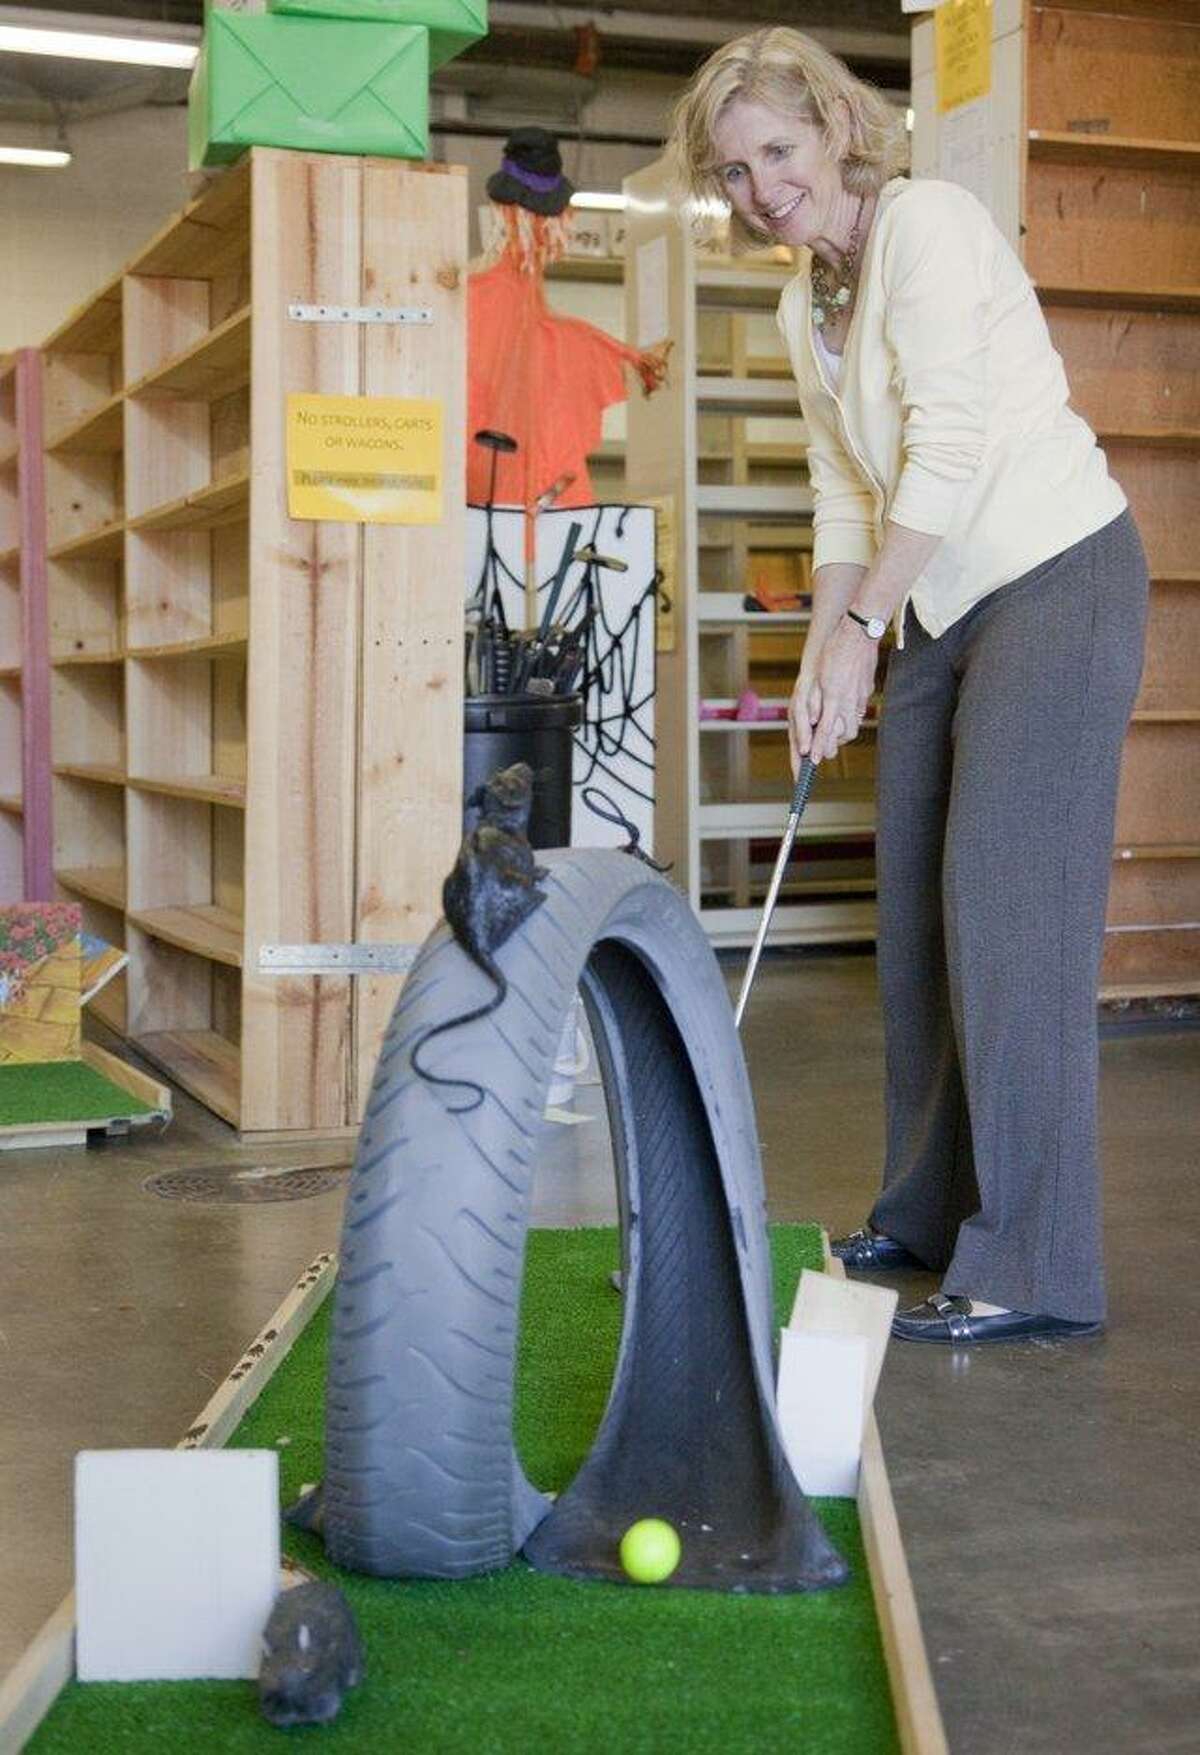 Indoor library mini-golf is not as crazy as it sounds. Shown is Kathleen Morgan, development director for the Lawrence (Kansas) Public Library, as she plays a hole. The Fairfield Public Library has its own similar family event on March 25.